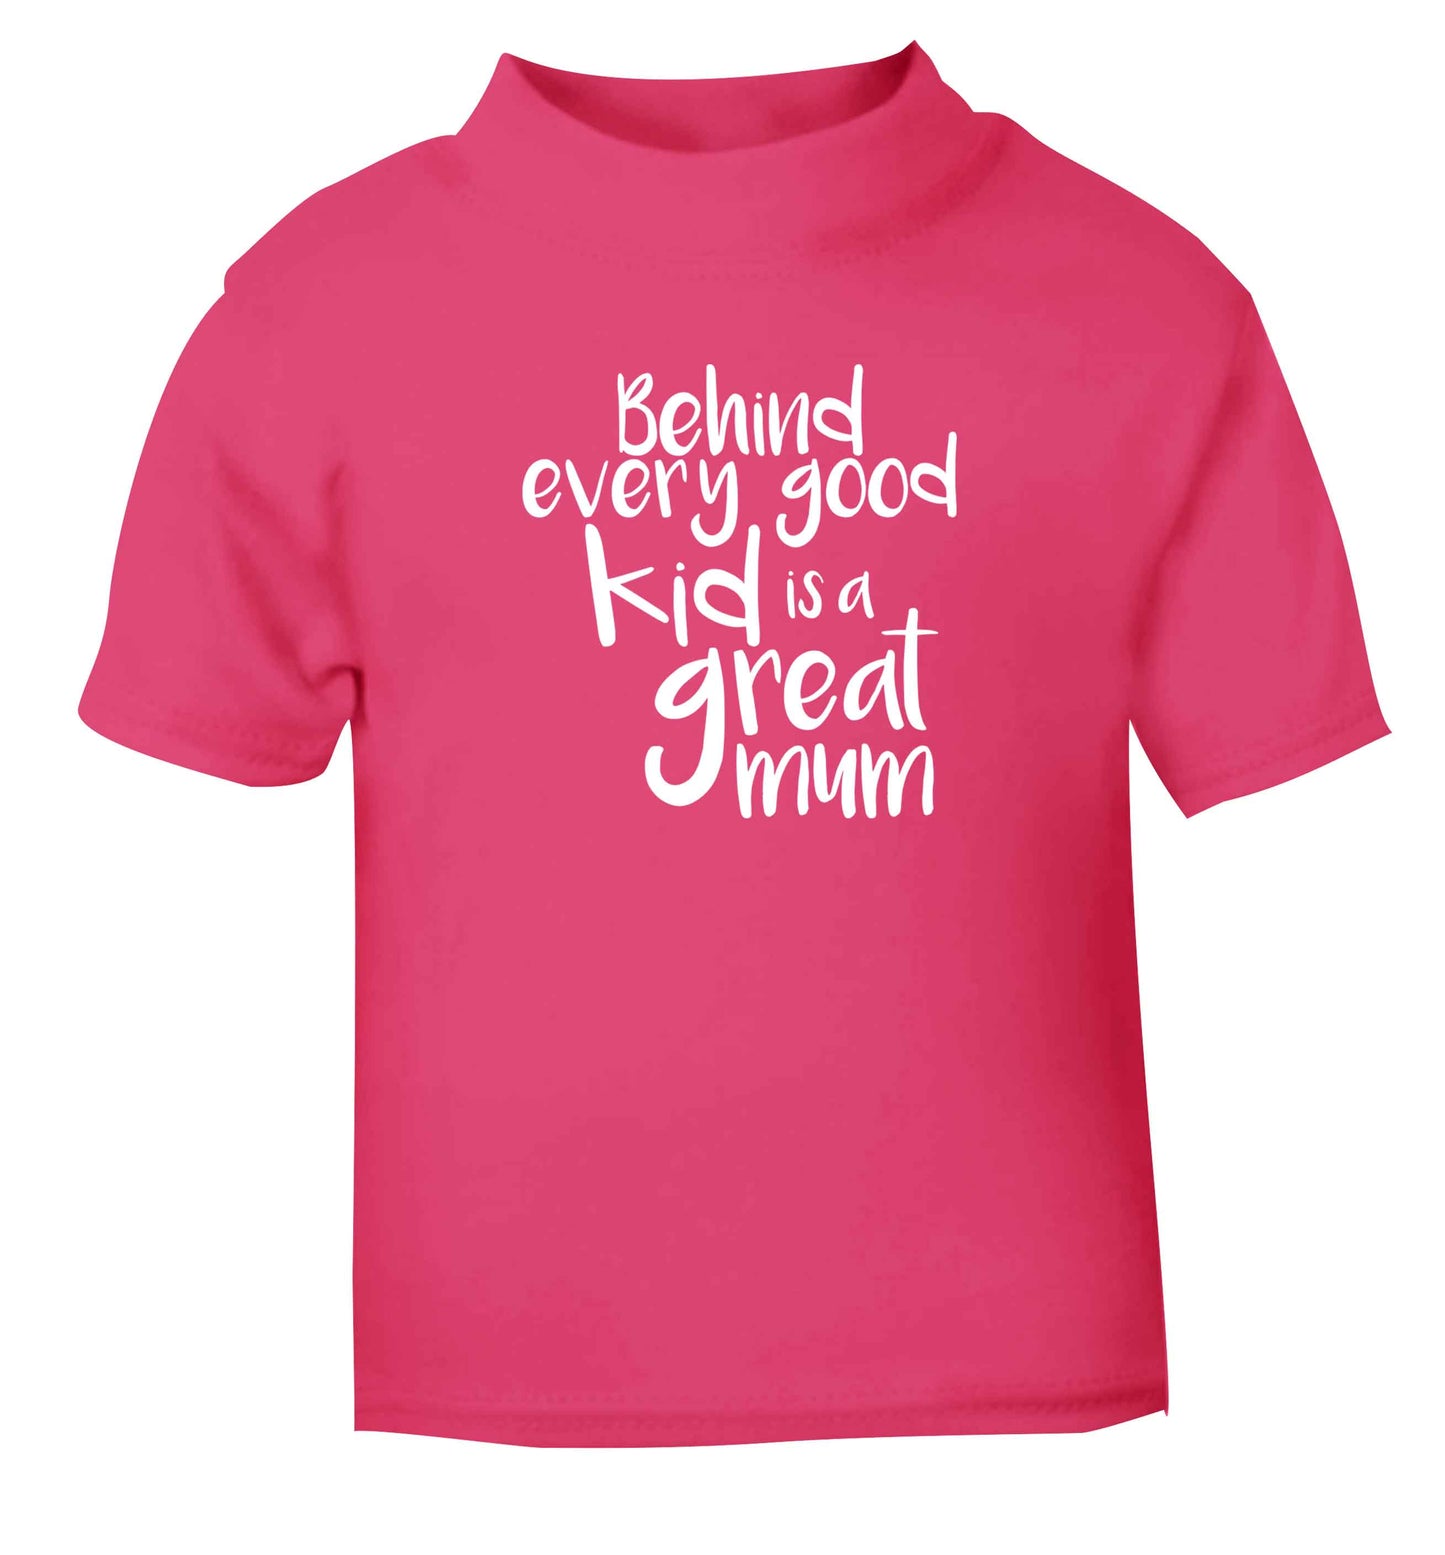 Behind every good kid is a great mum pink baby toddler Tshirt 2 Years